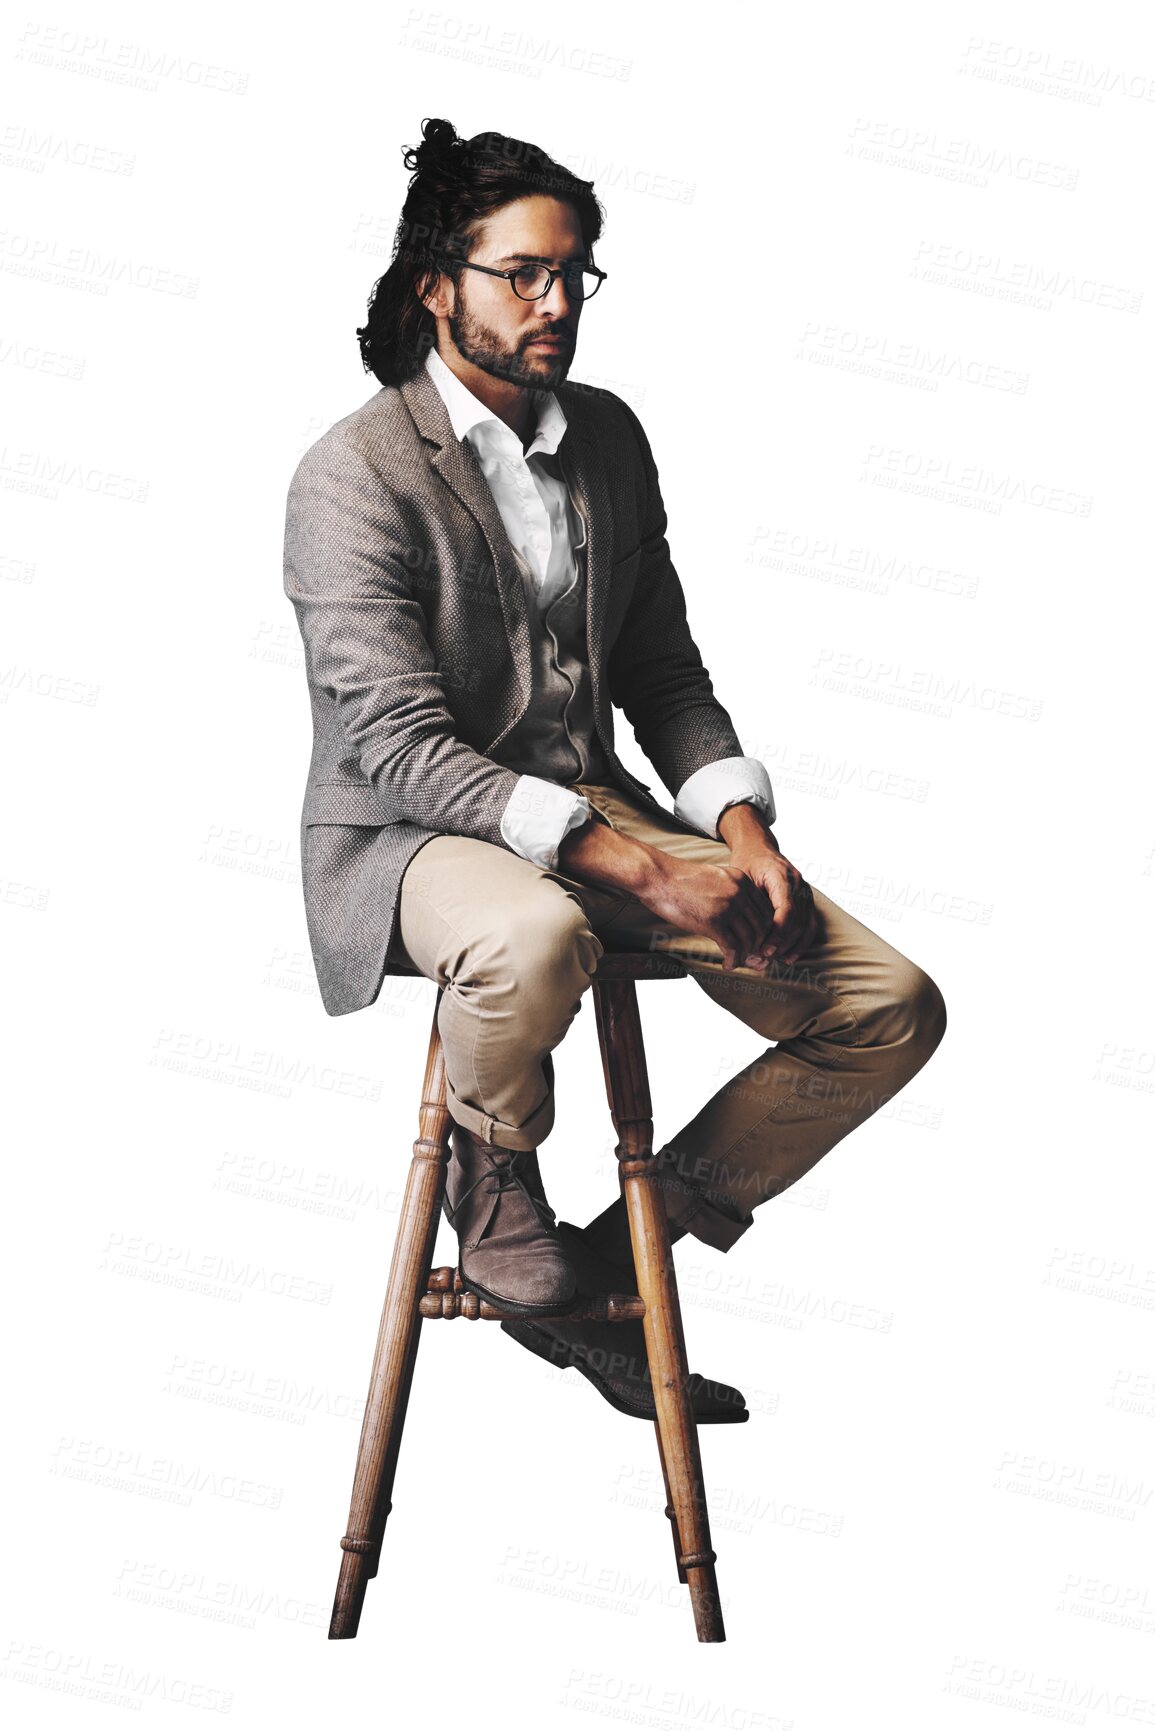 Buy stock photo Serious, thinking and business man on chair on isolated, PNG and transparent background. Professional style, fashion and person sitting with trendy clothes, stylish outfit and confidence for career